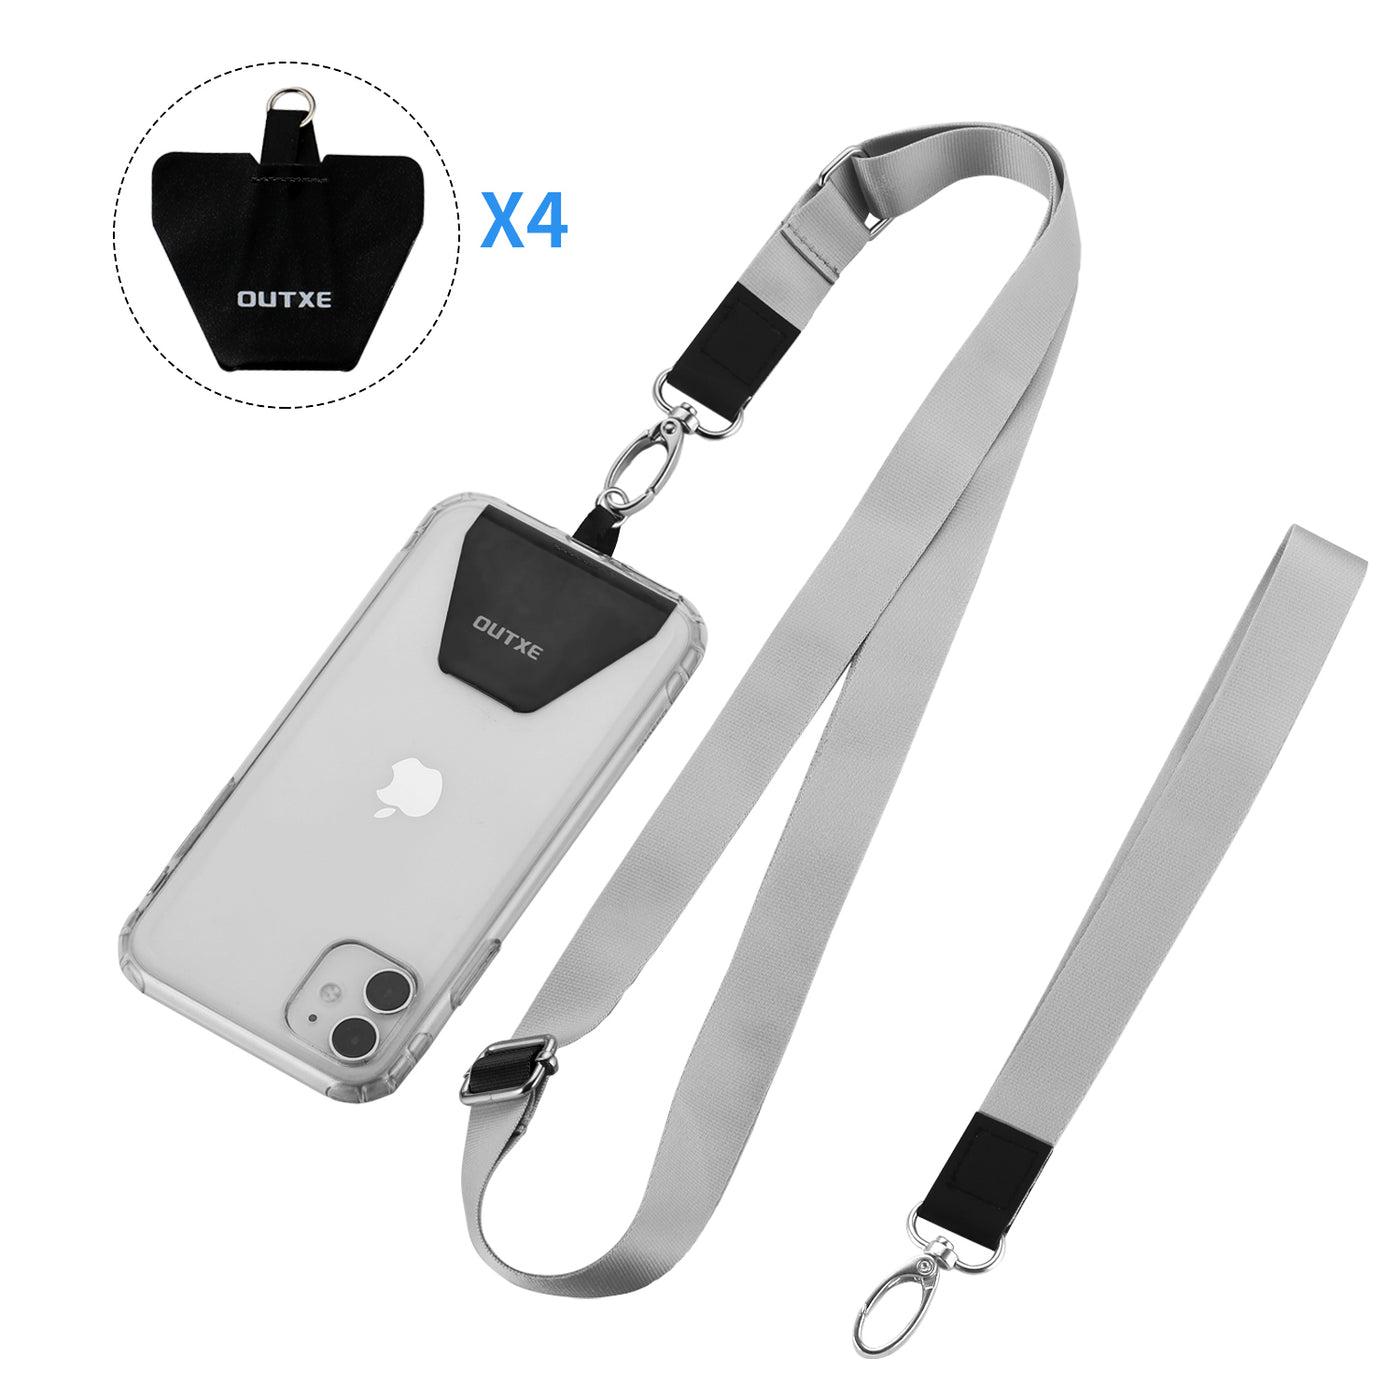 OUTXE Universal Phone Lanyard 1 * Neck Strap and 1 Wrist Strap with 4 * Pads